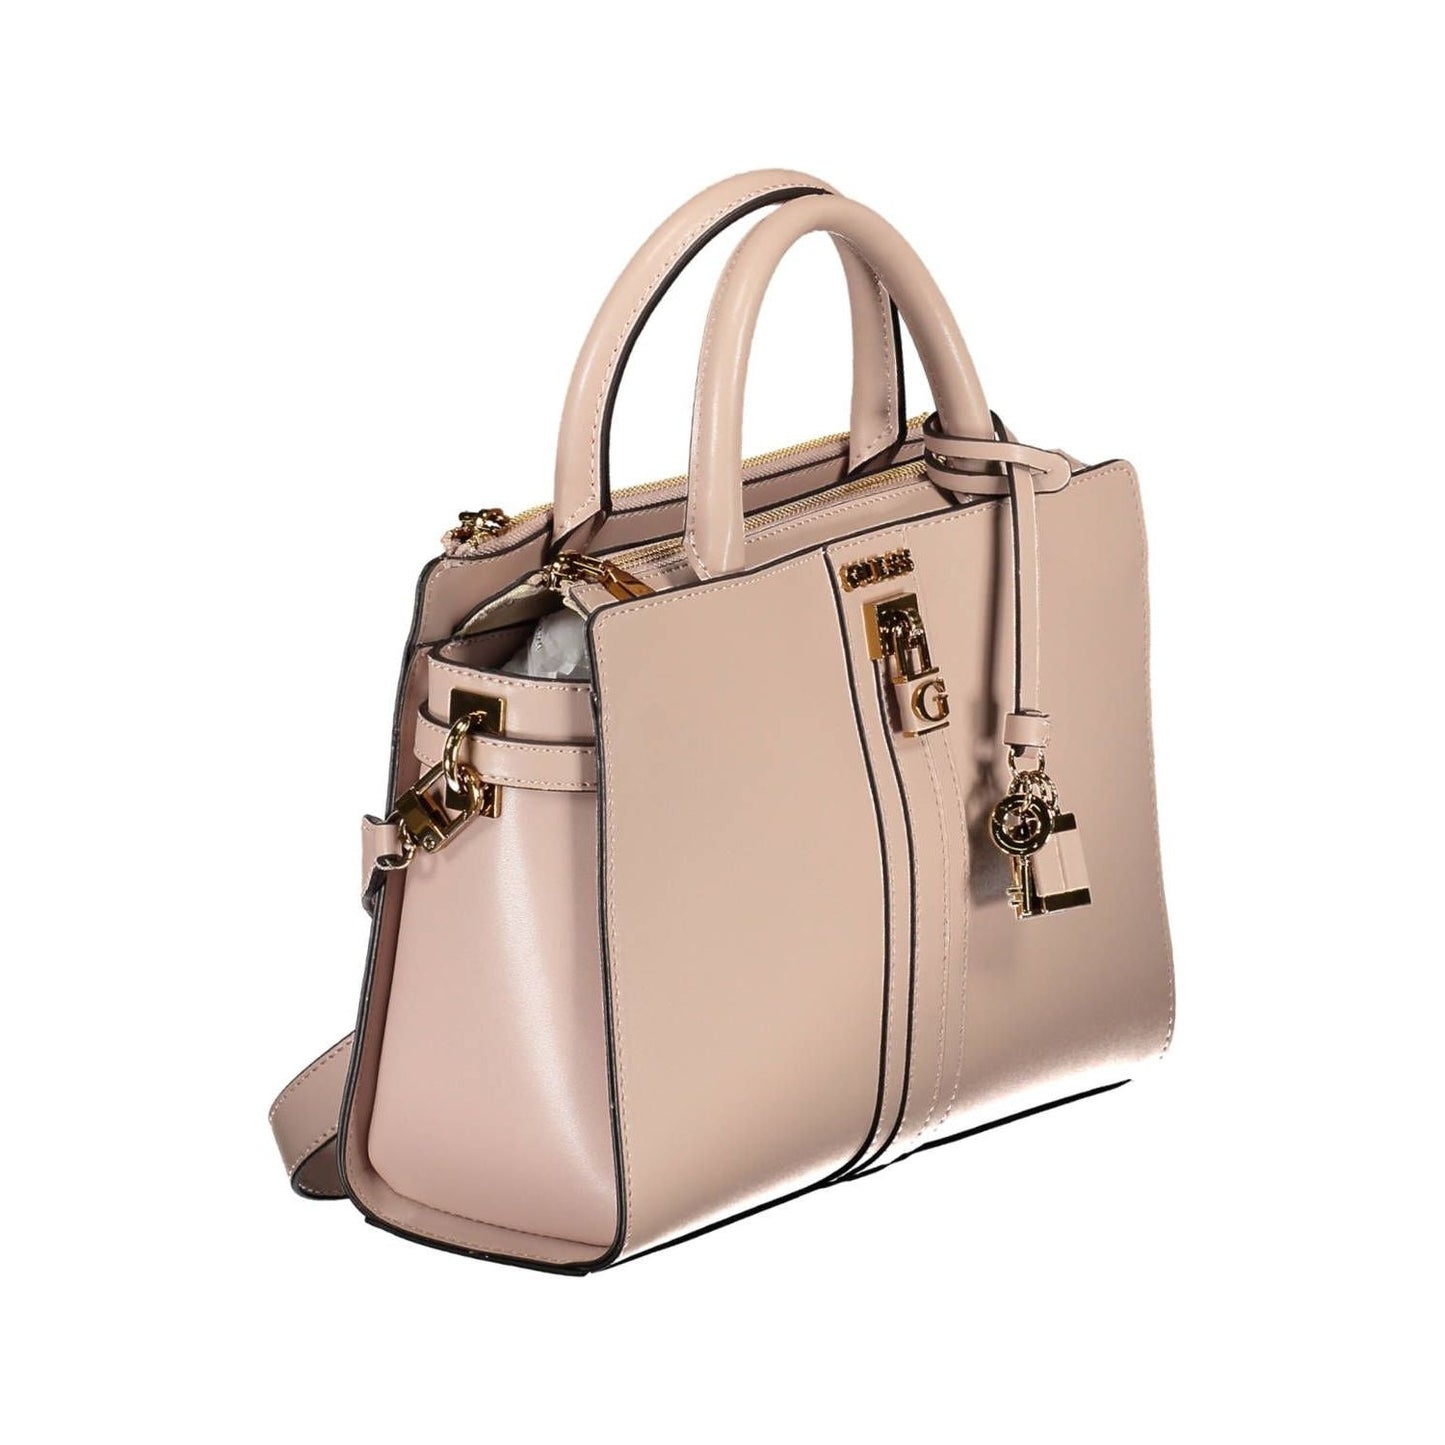 Guess Jeans Chic Pink Guess Handbag with Contrasting Details chic-pink-guess-handbag-with-contrasting-details